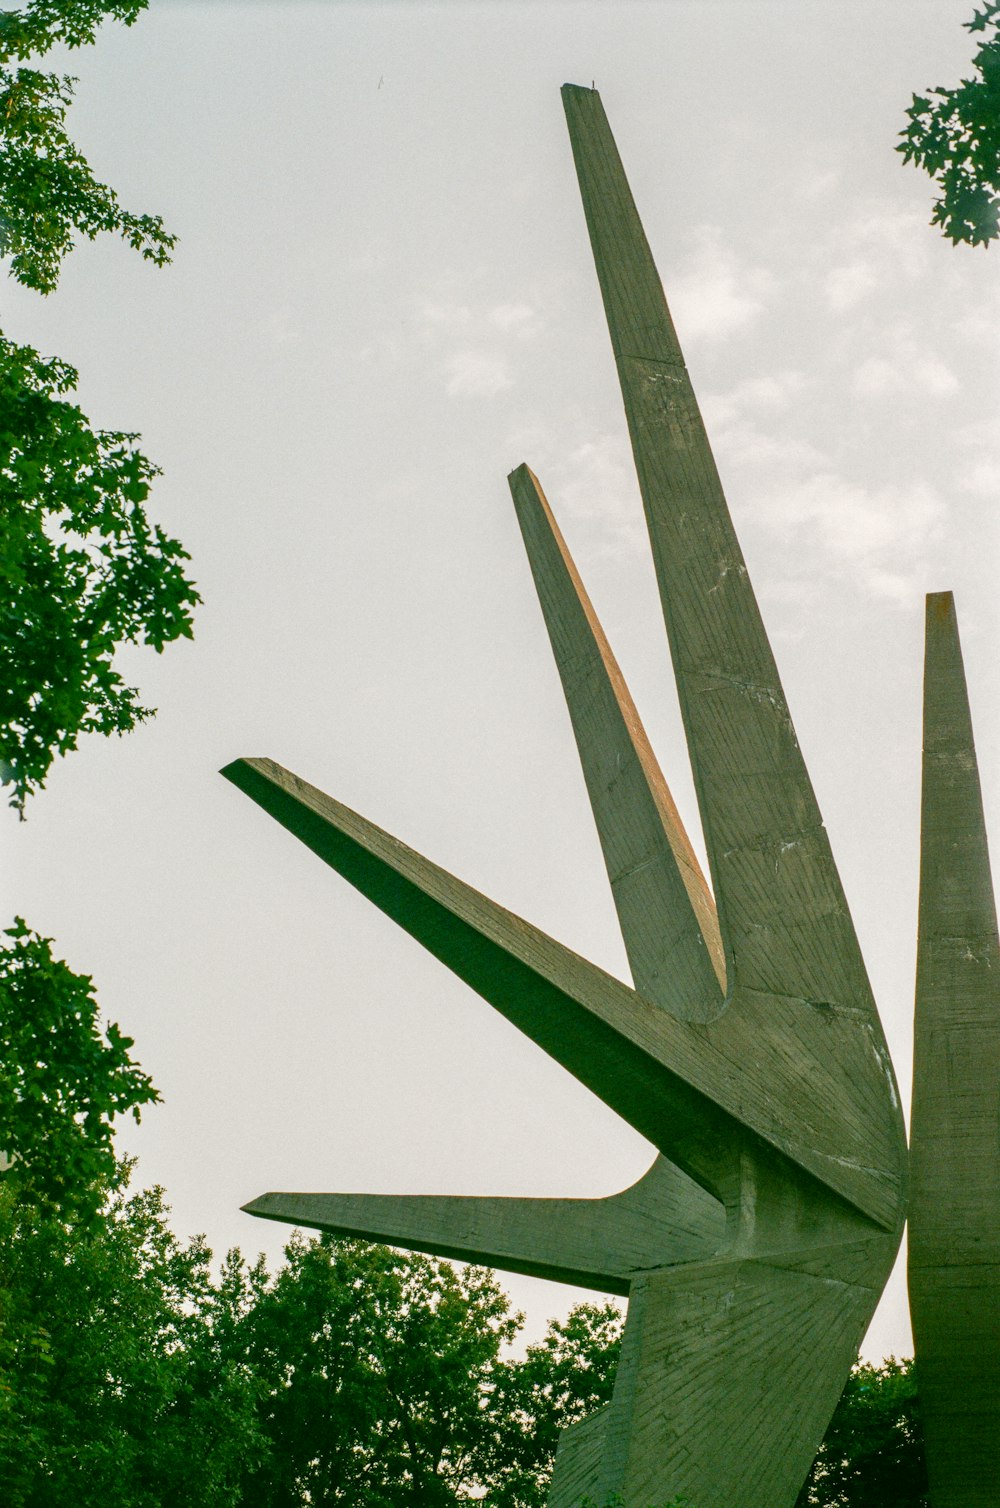 a sculpture of a pair of scissors with trees in the background